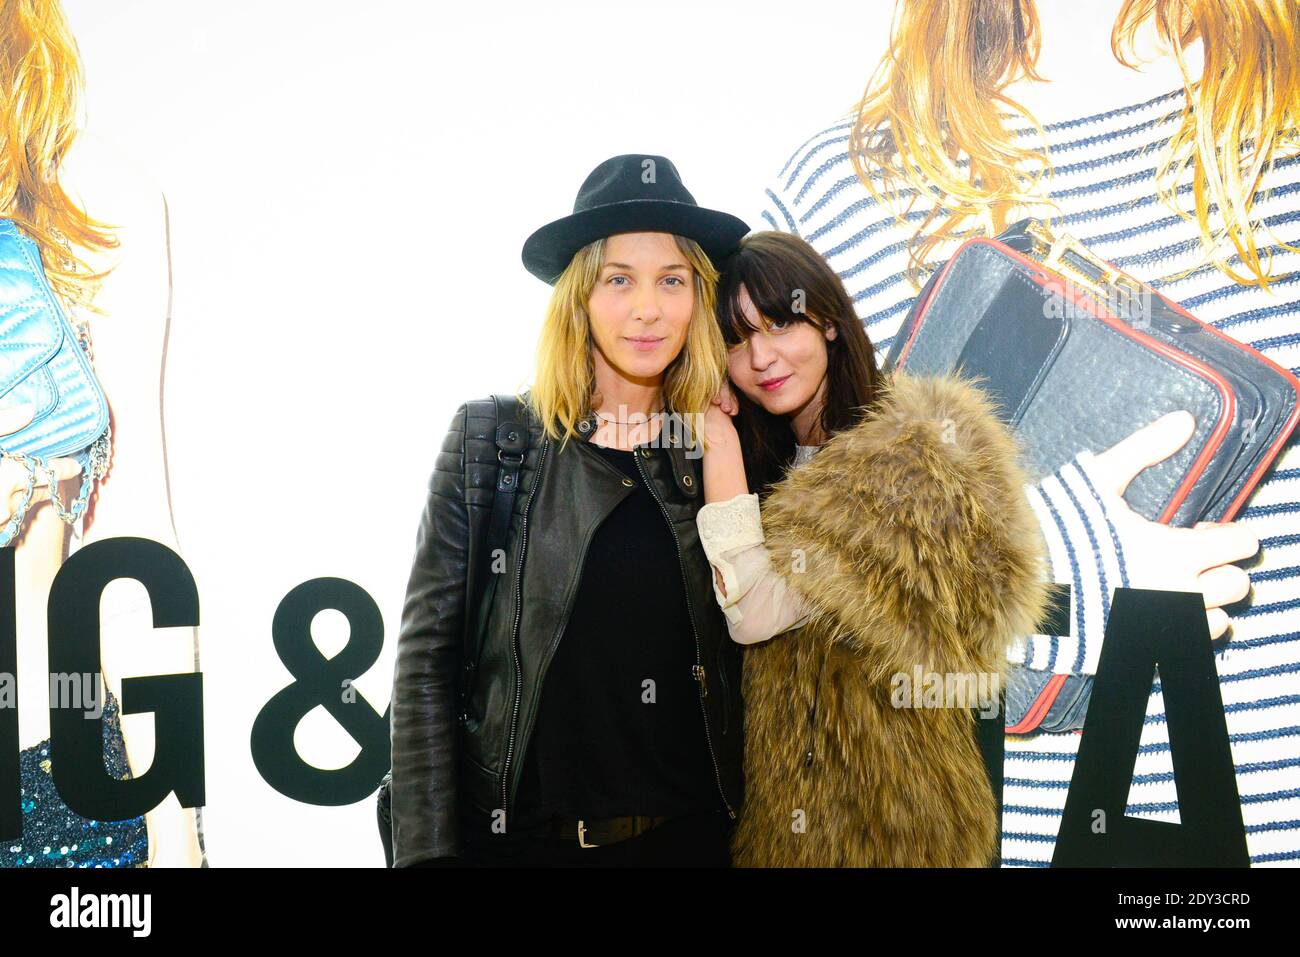 Exclusive. Cecila Bonstrom and Irina Lazareanu attending at the opening party for the new Zadig & Voltaire flagship store in Paris, France on October 9. 2014. Photo by Karine Mahiout/ABACAPRESS.COM Stock Photo